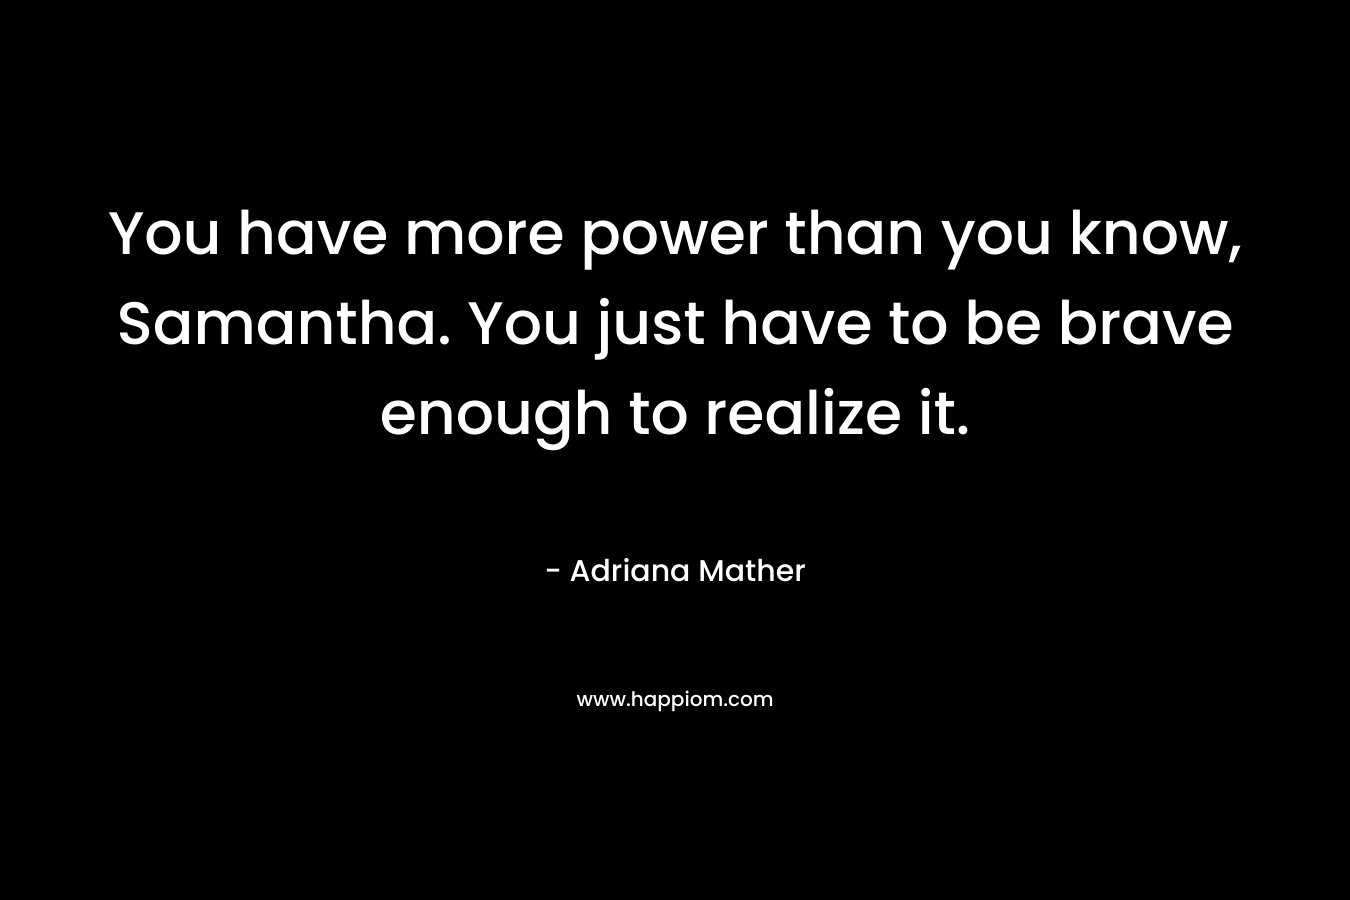 You have more power than you know, Samantha. You just have to be brave enough to realize it.